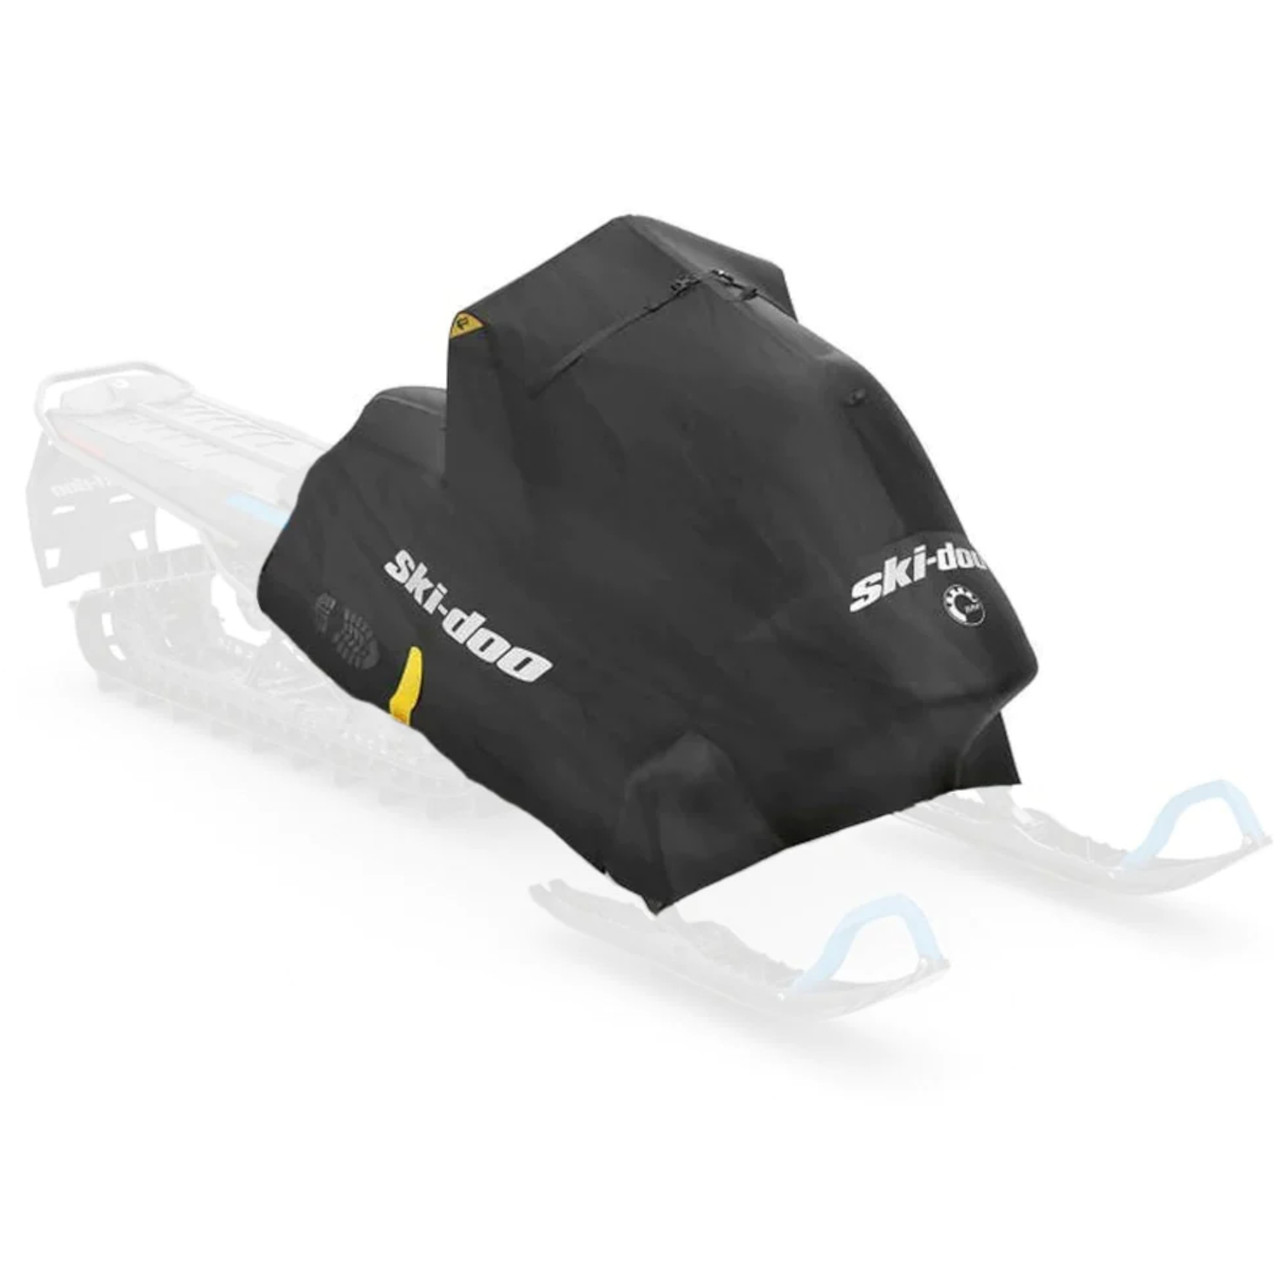 Ski-Doo New OEM, Ride On Cover (ROC) System, 860202608